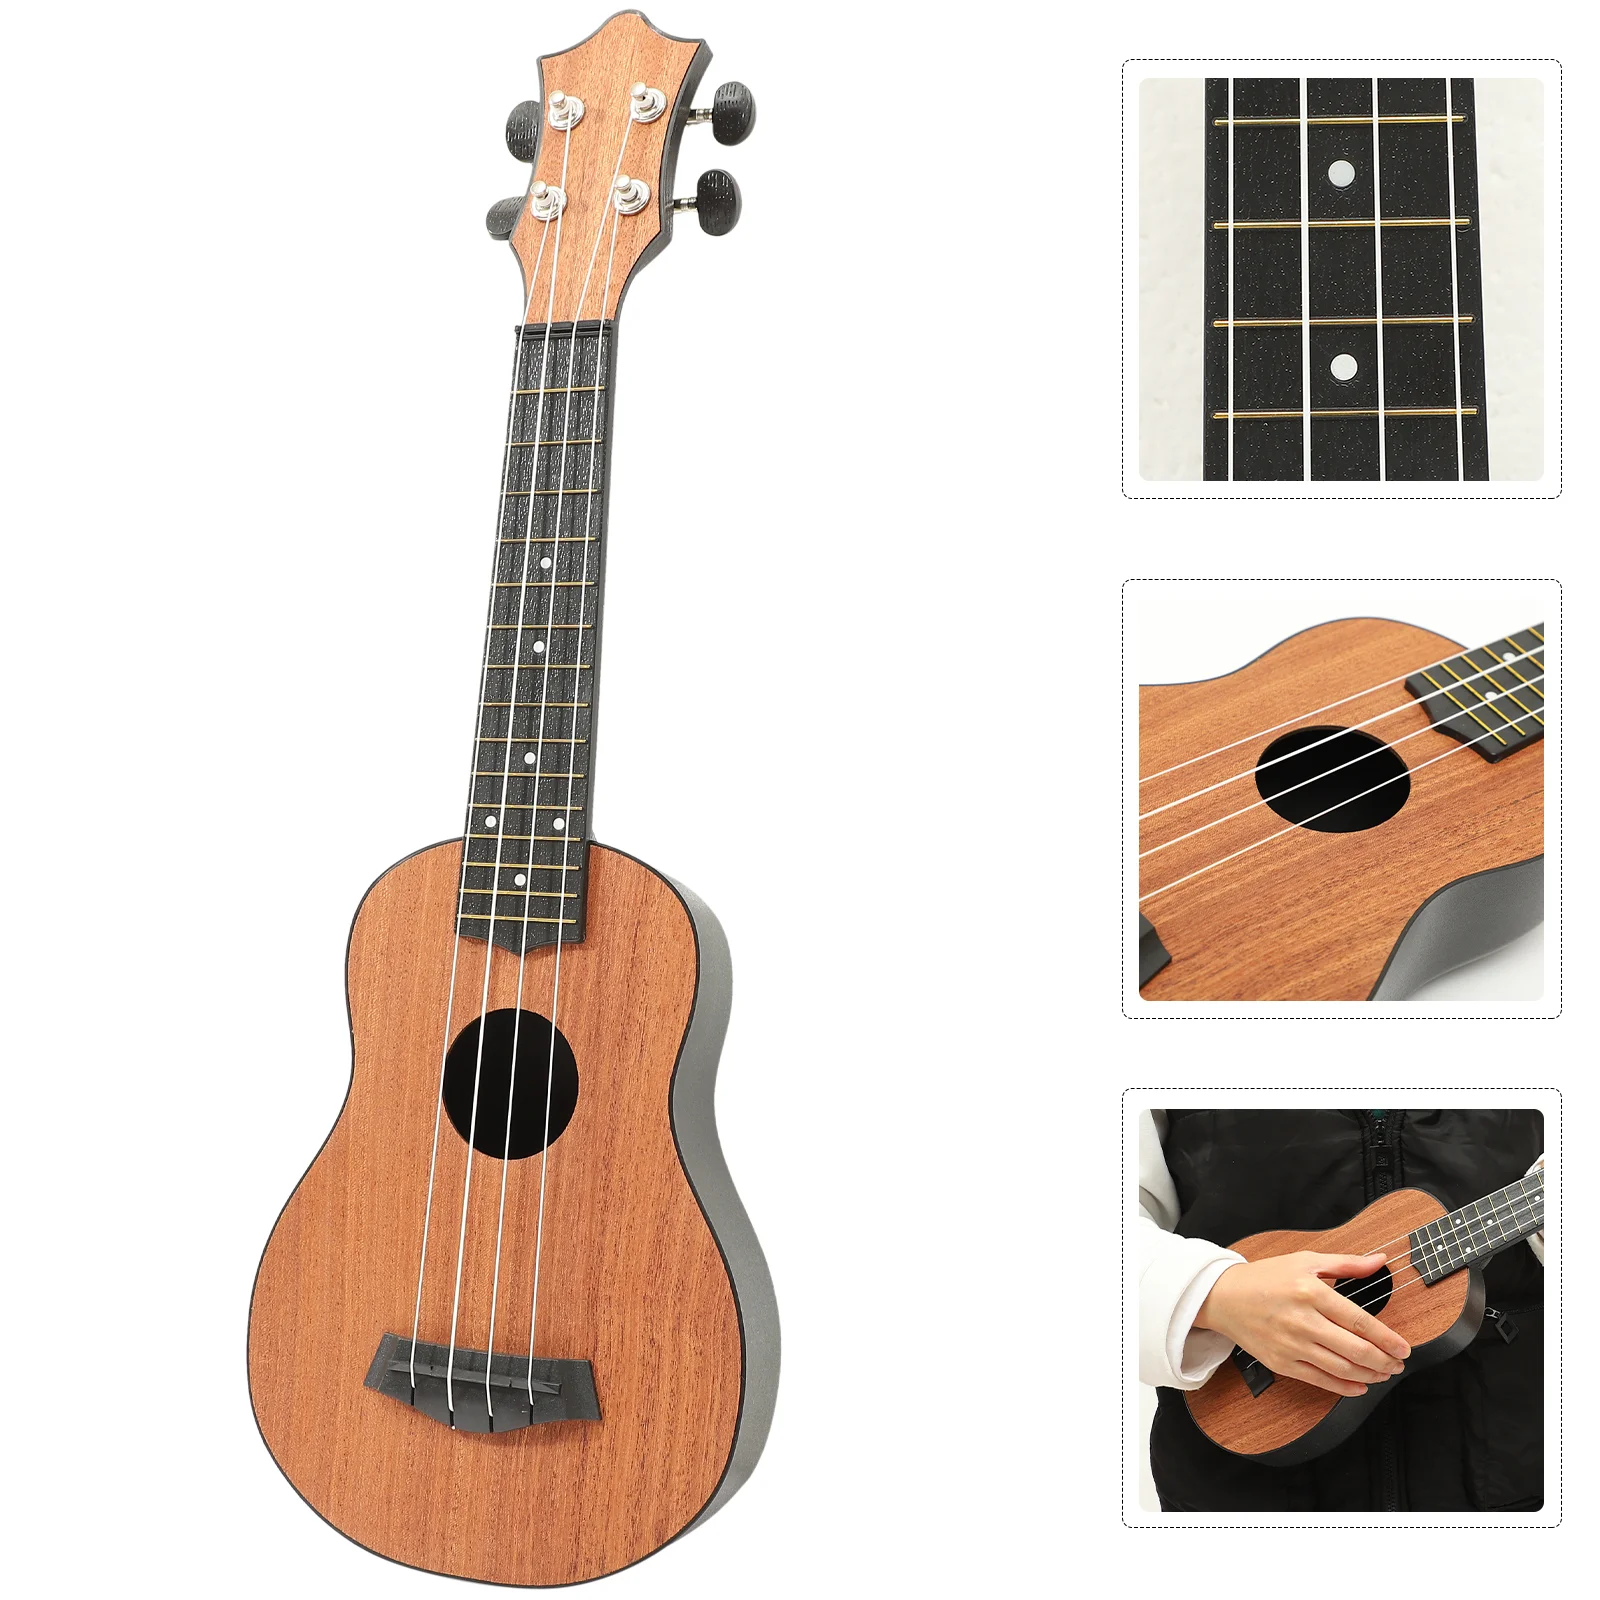 

Guitars Four String Ukulele Child Playing Classical Wood Wooden Soprano Beginner Children Adult Musical